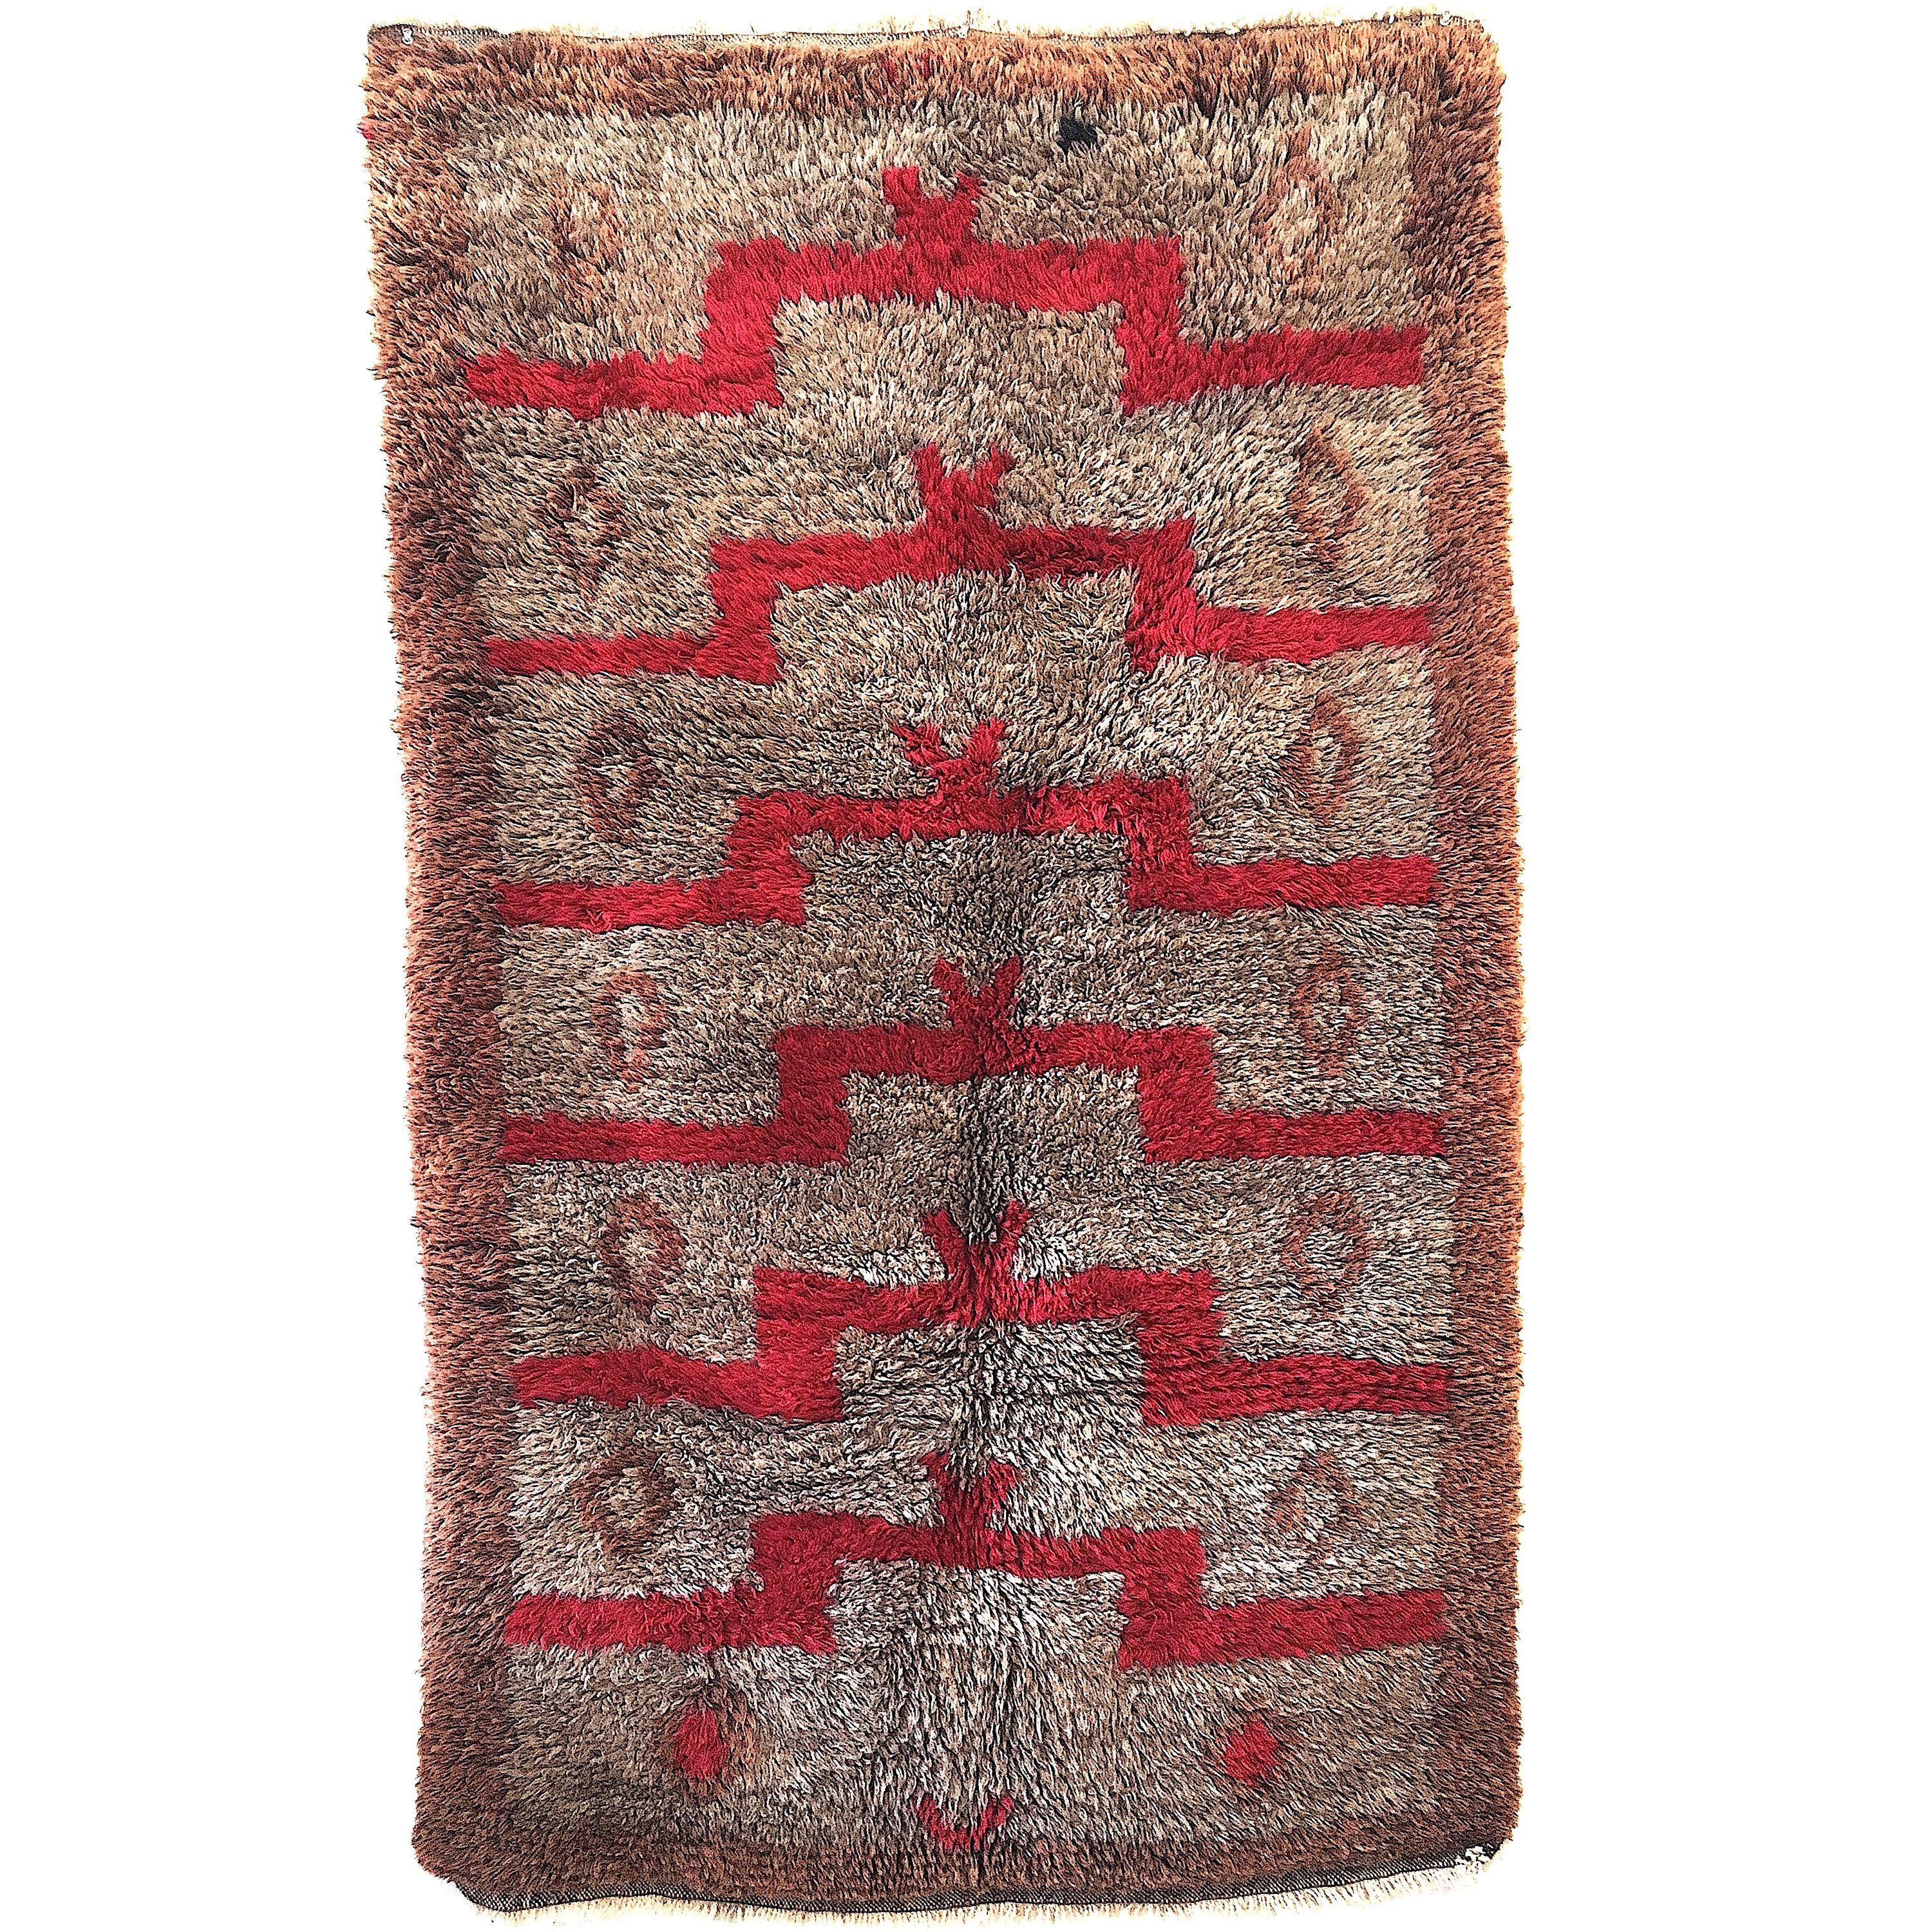 Vintage Tulu Rug with Architectural Step Design in Red and Brown